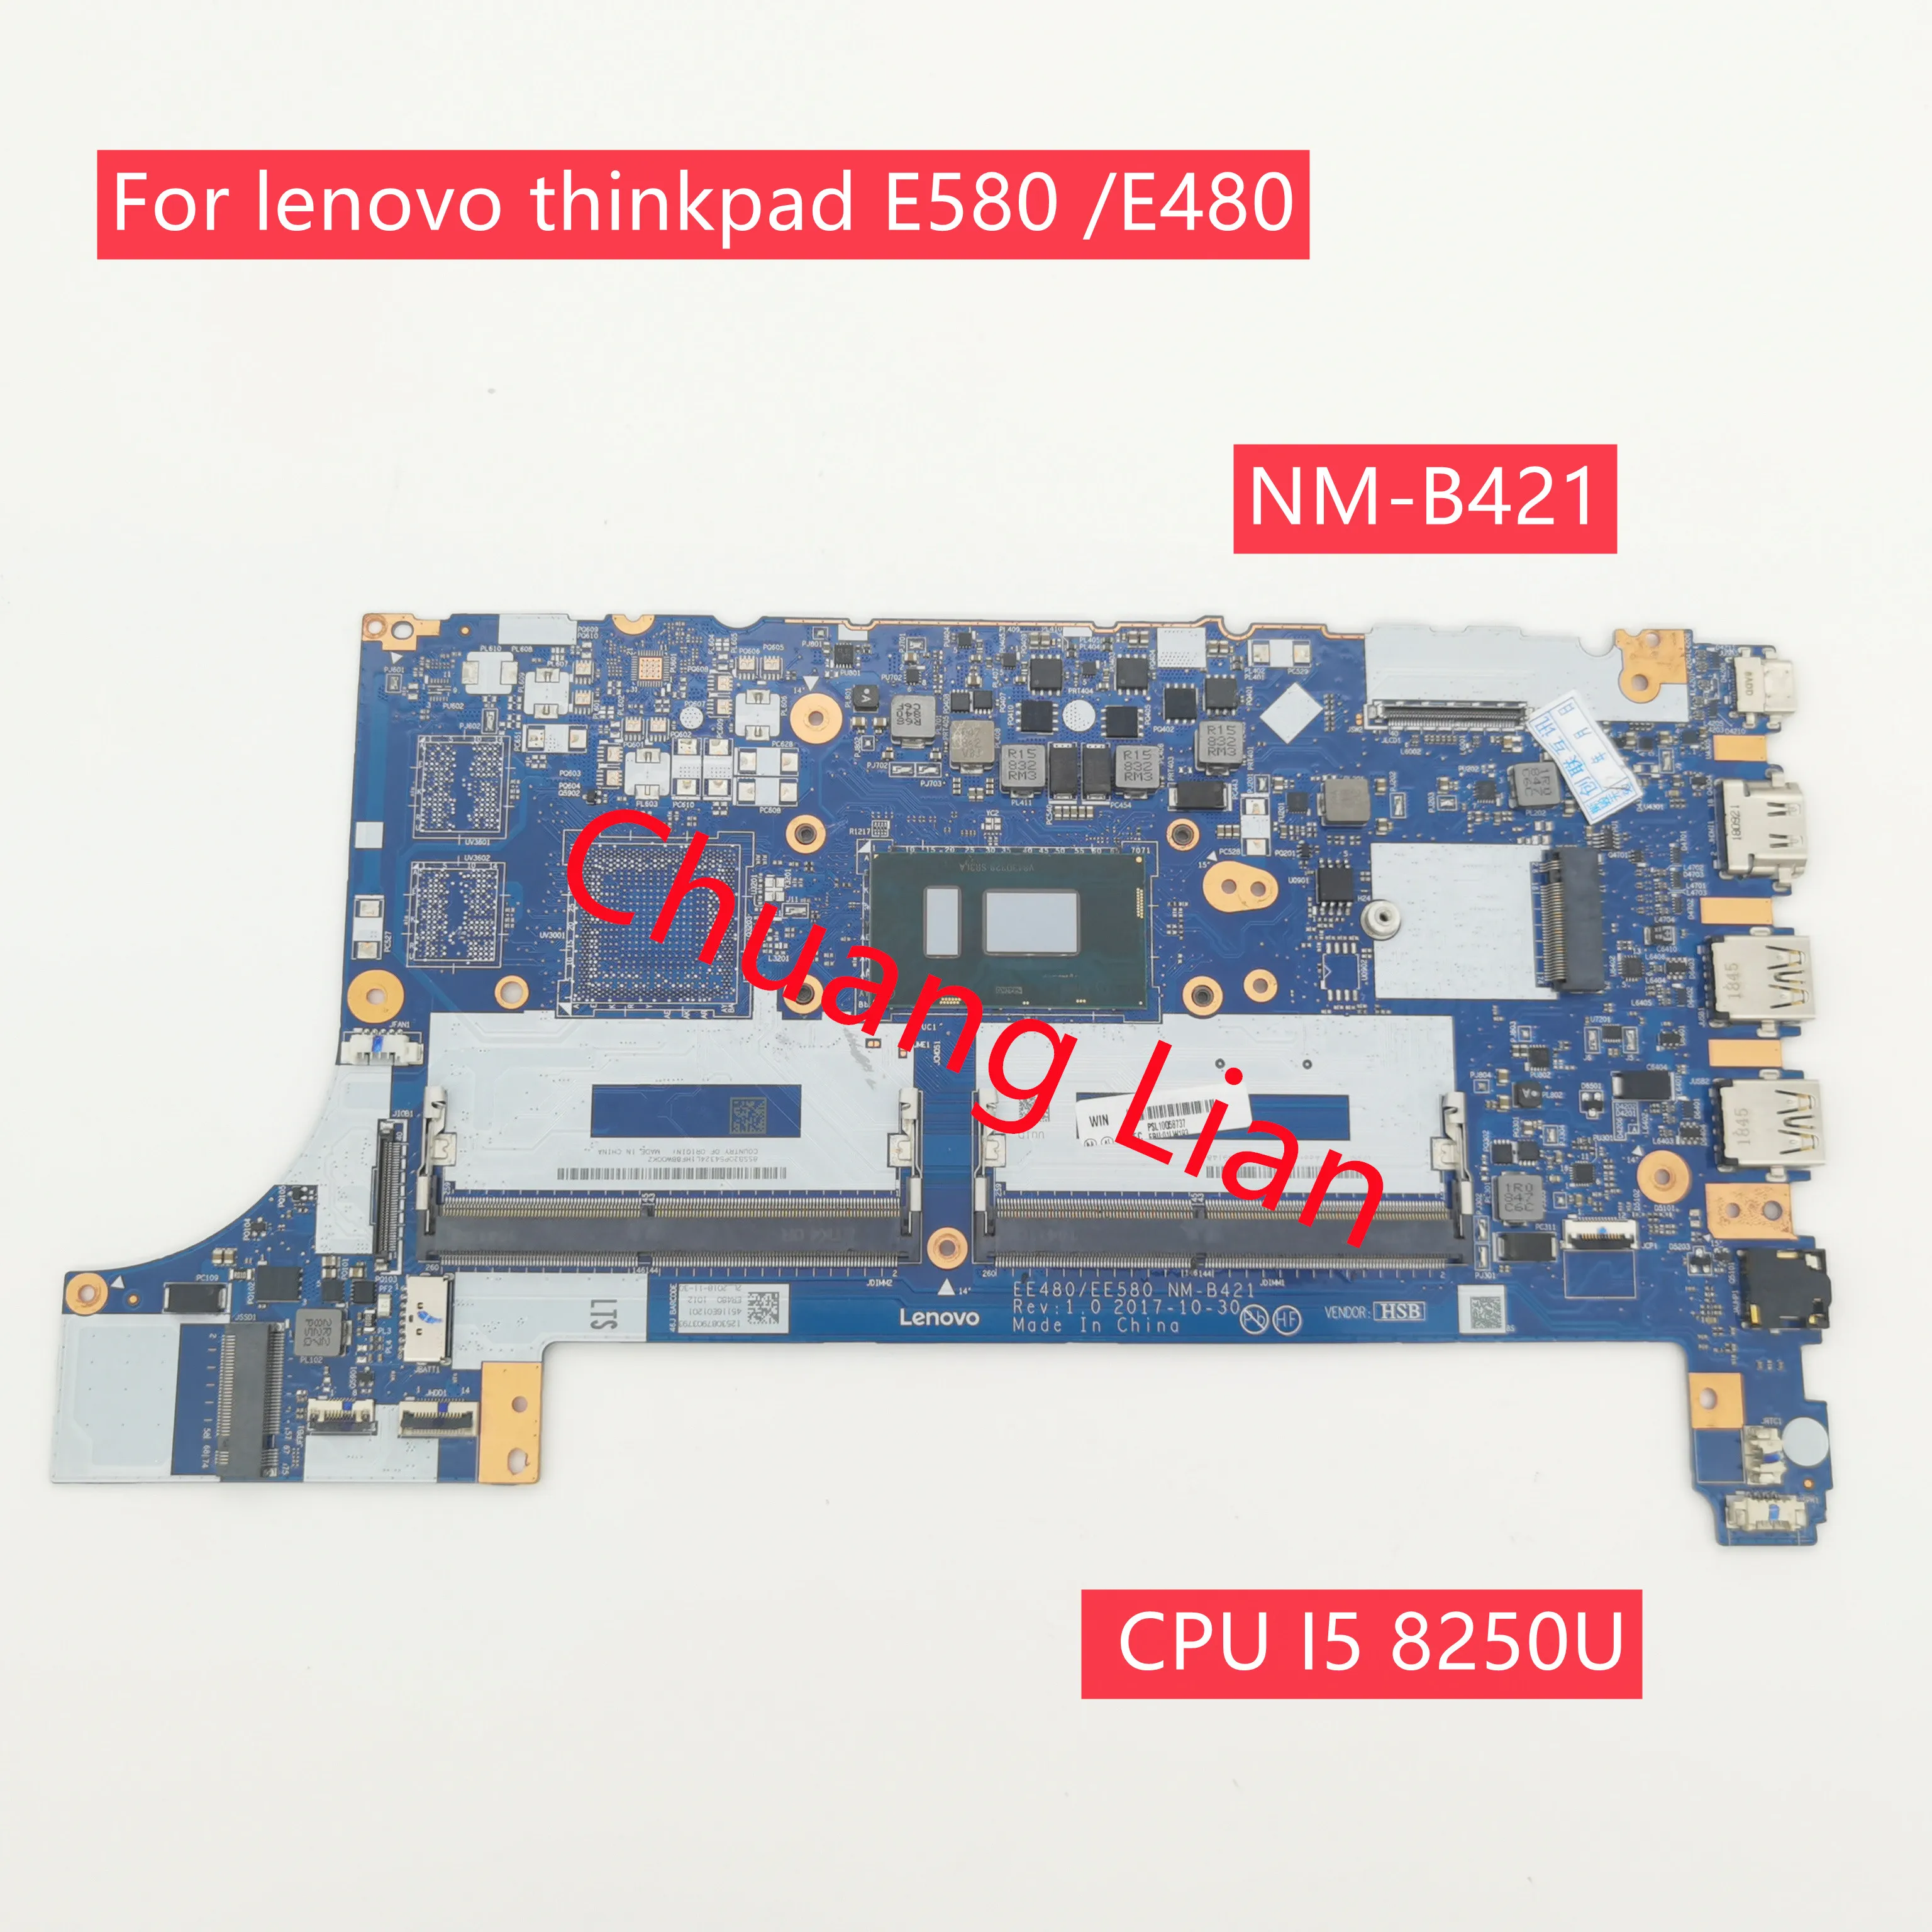 EE480/EE580 NM-B421 mainboard For lenovo thinkpad E580 /E480 Loptop motherboard with CPU I5 8250U UMA DDR4 100% Fully Tested motherboard